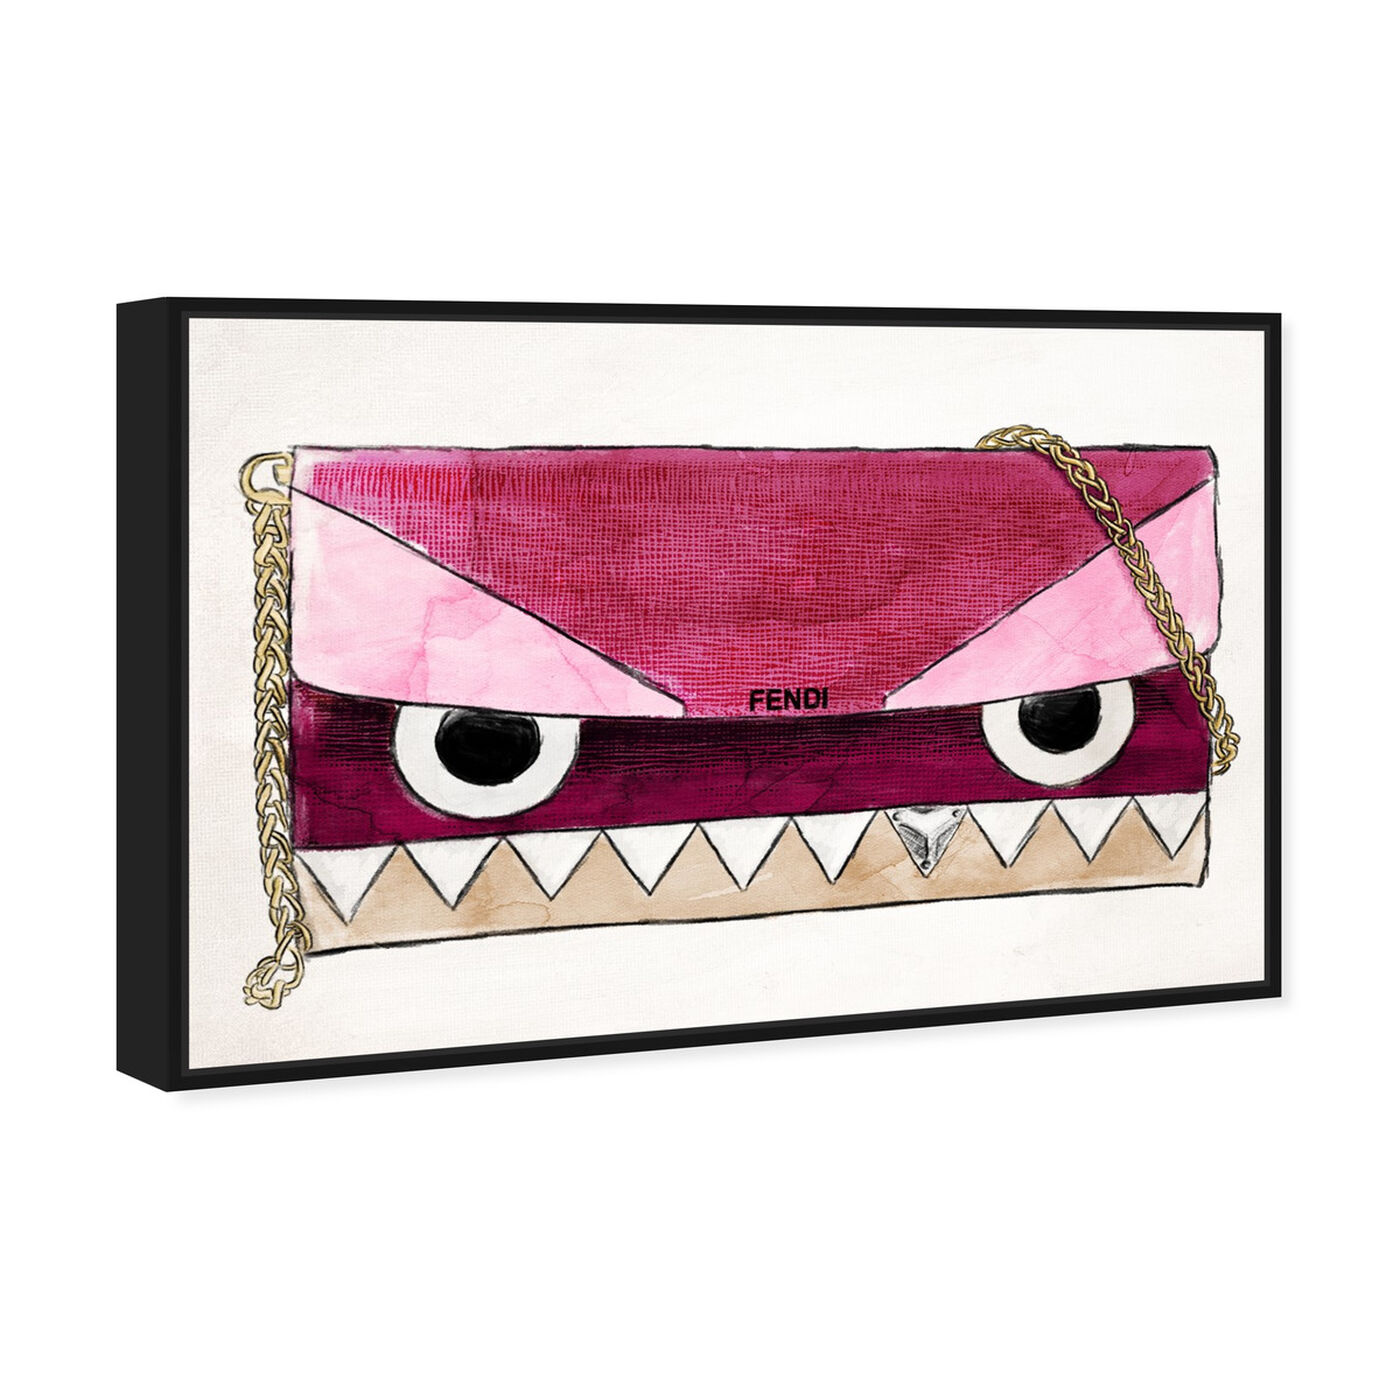 Angled view of A Monster Ate My Bag featuring fashion and glam and handbags art.